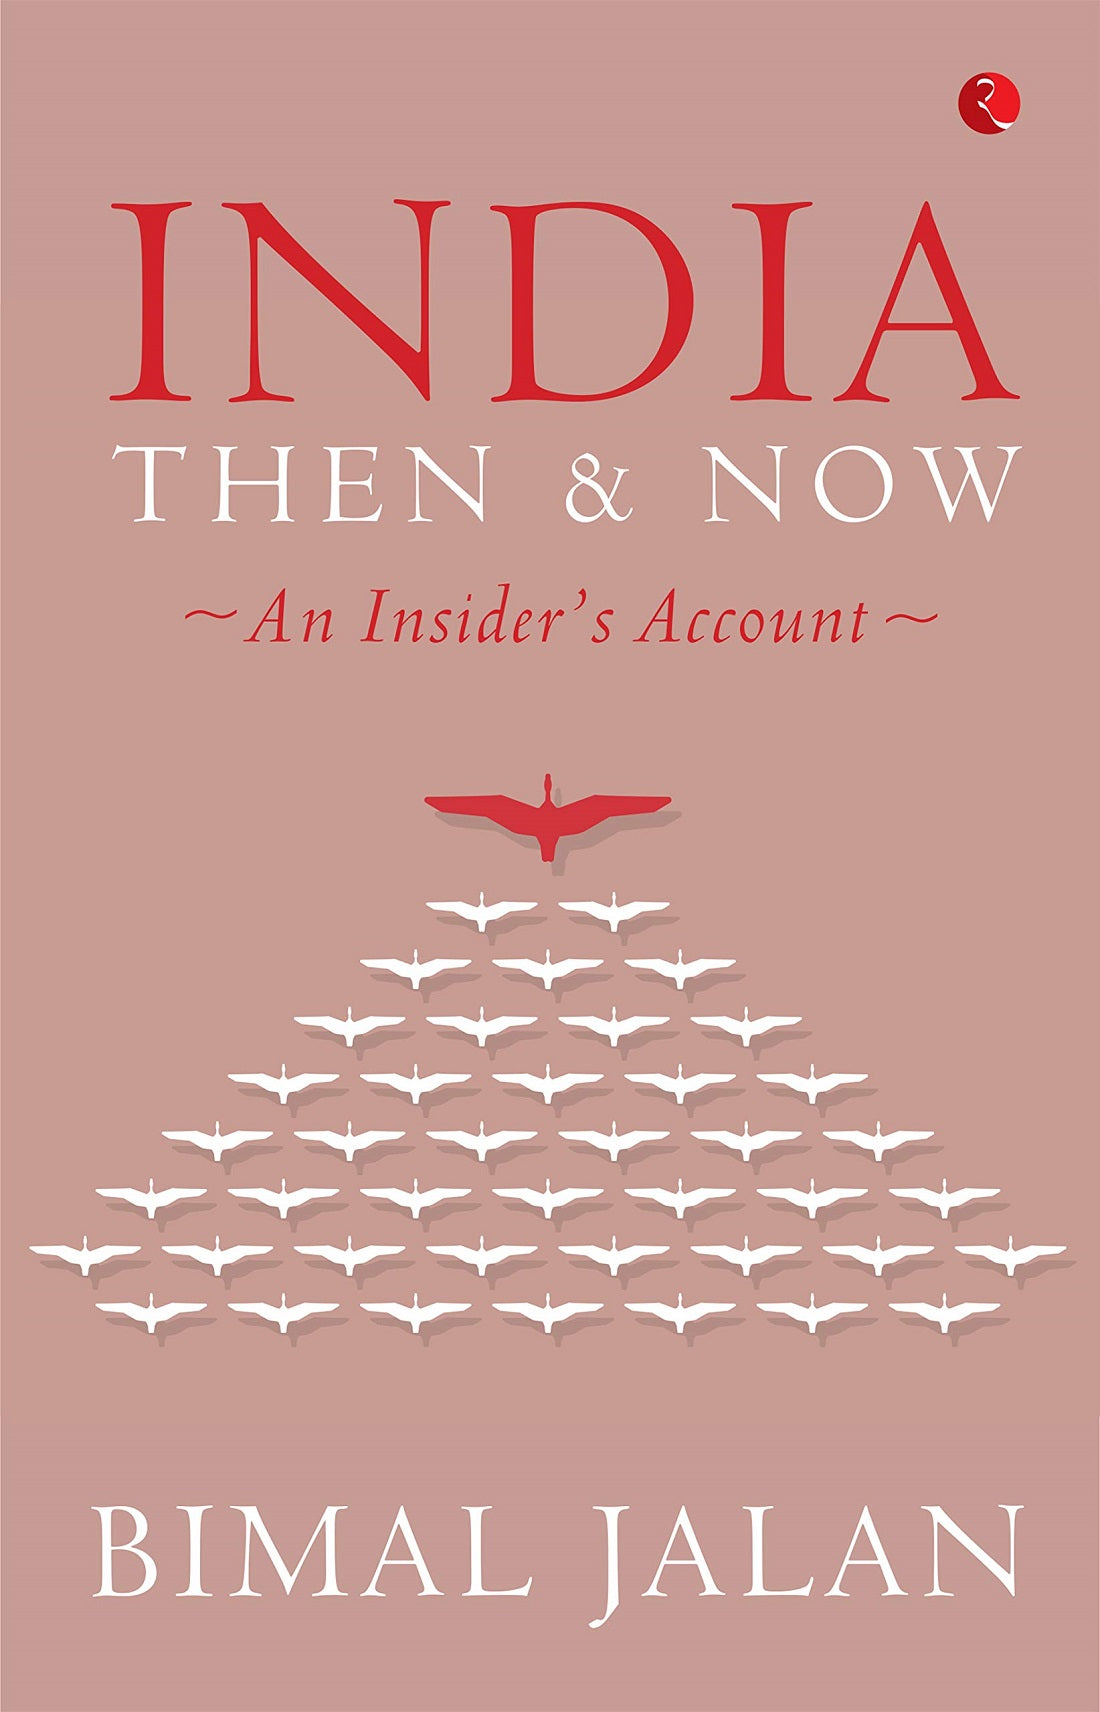 INDIA THEN & NOW AN INSIDER'S ACCOUNT